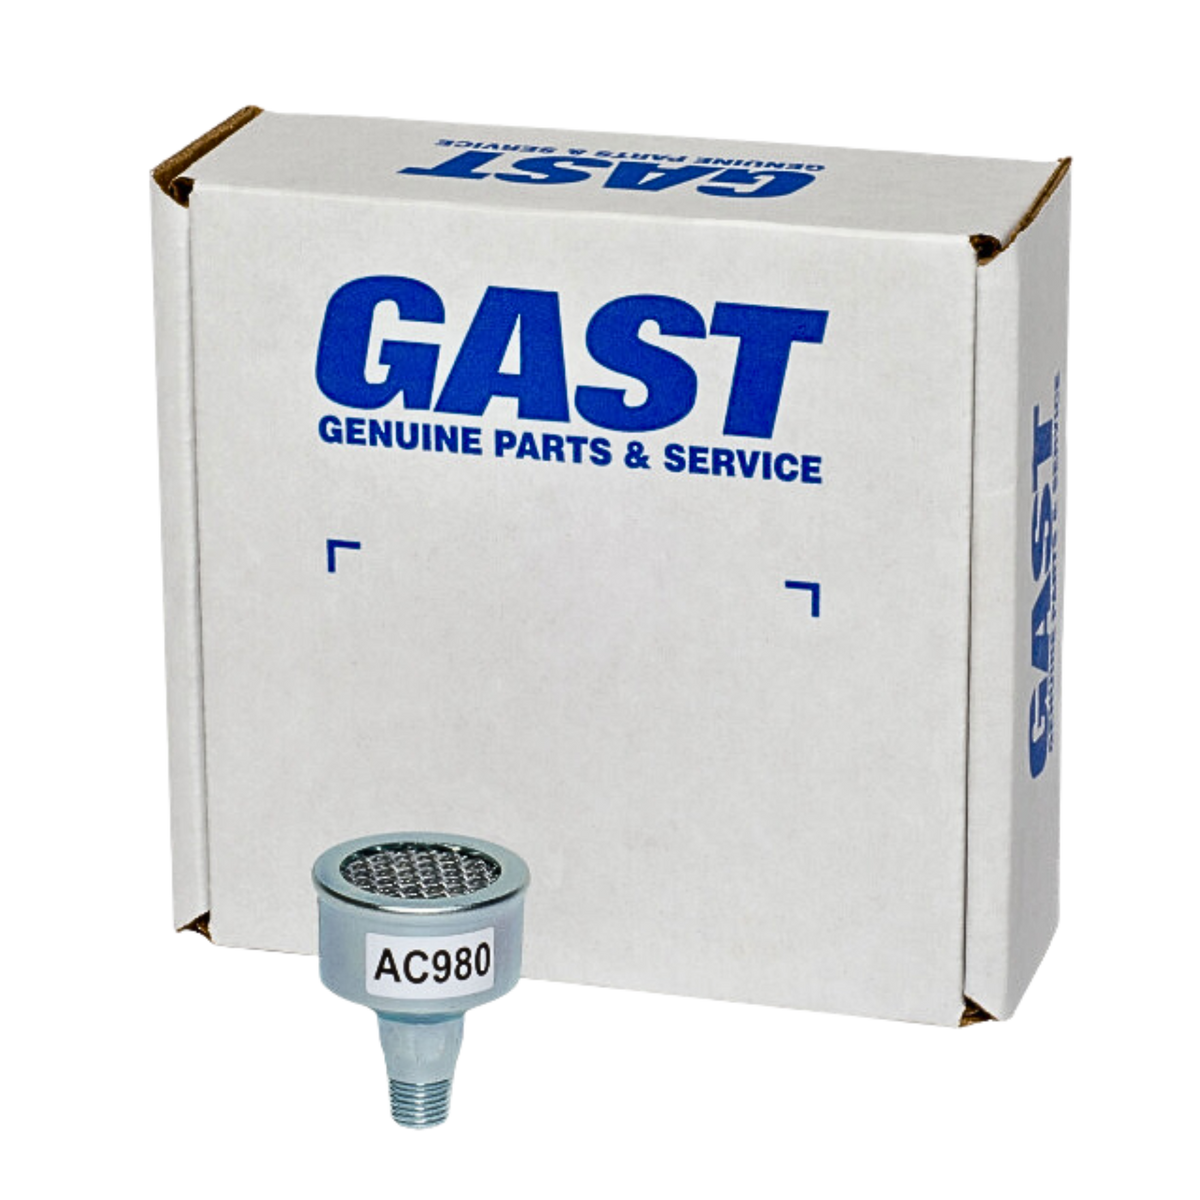 Gast | 2AM/4AM/NL32/NL42 Muffler Assembly | AC980 used on gast product line